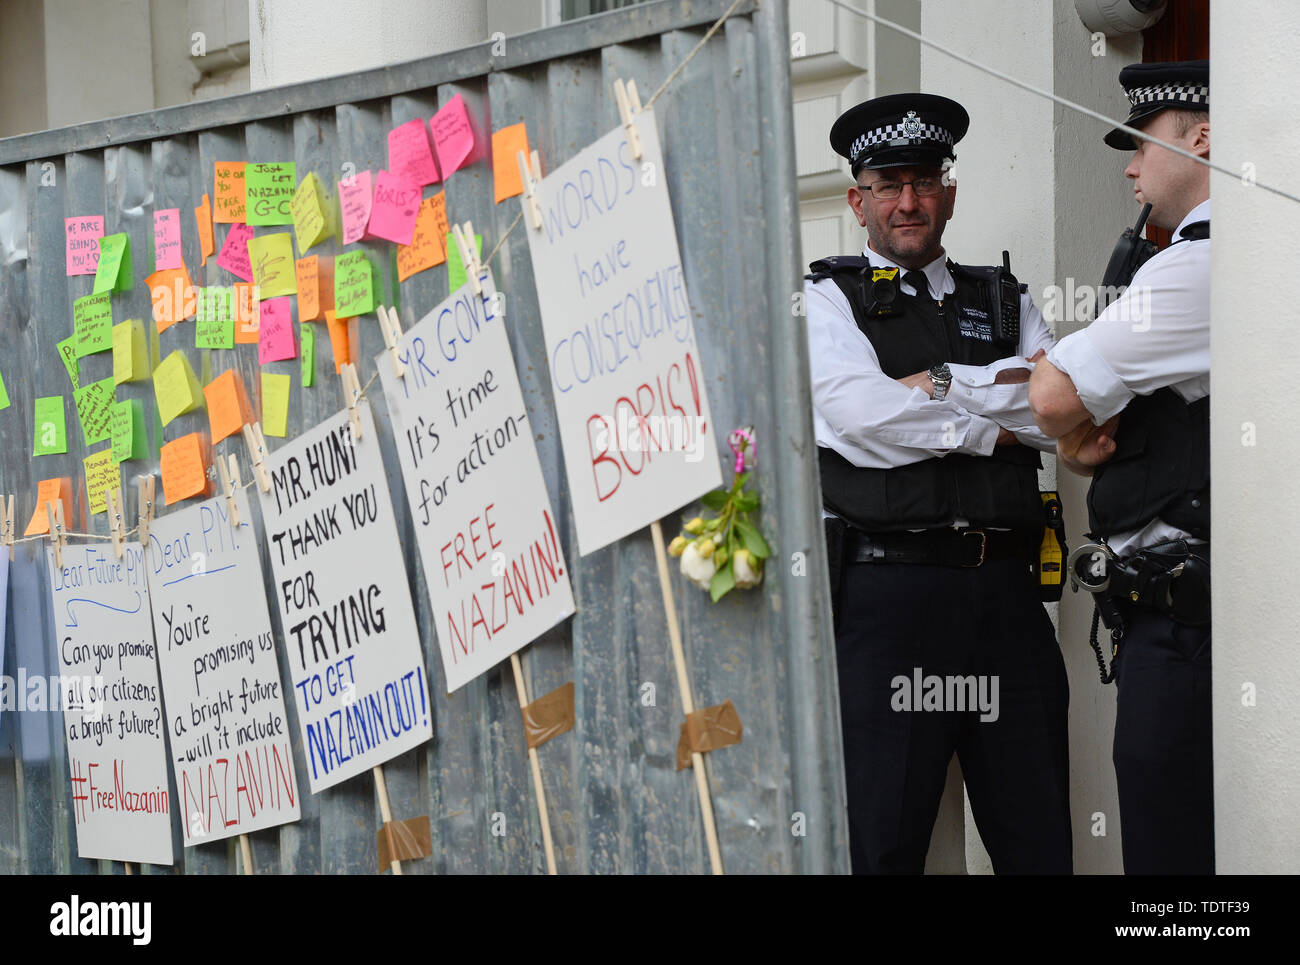 Police officers guard the Iranian Embassy in London, behind signs put up by supporters of Richard Radcliffe, the husband of detained Nazanin Zaghari Ratcliffe, who is on a hunger strike outside the embassy. Stock Photo